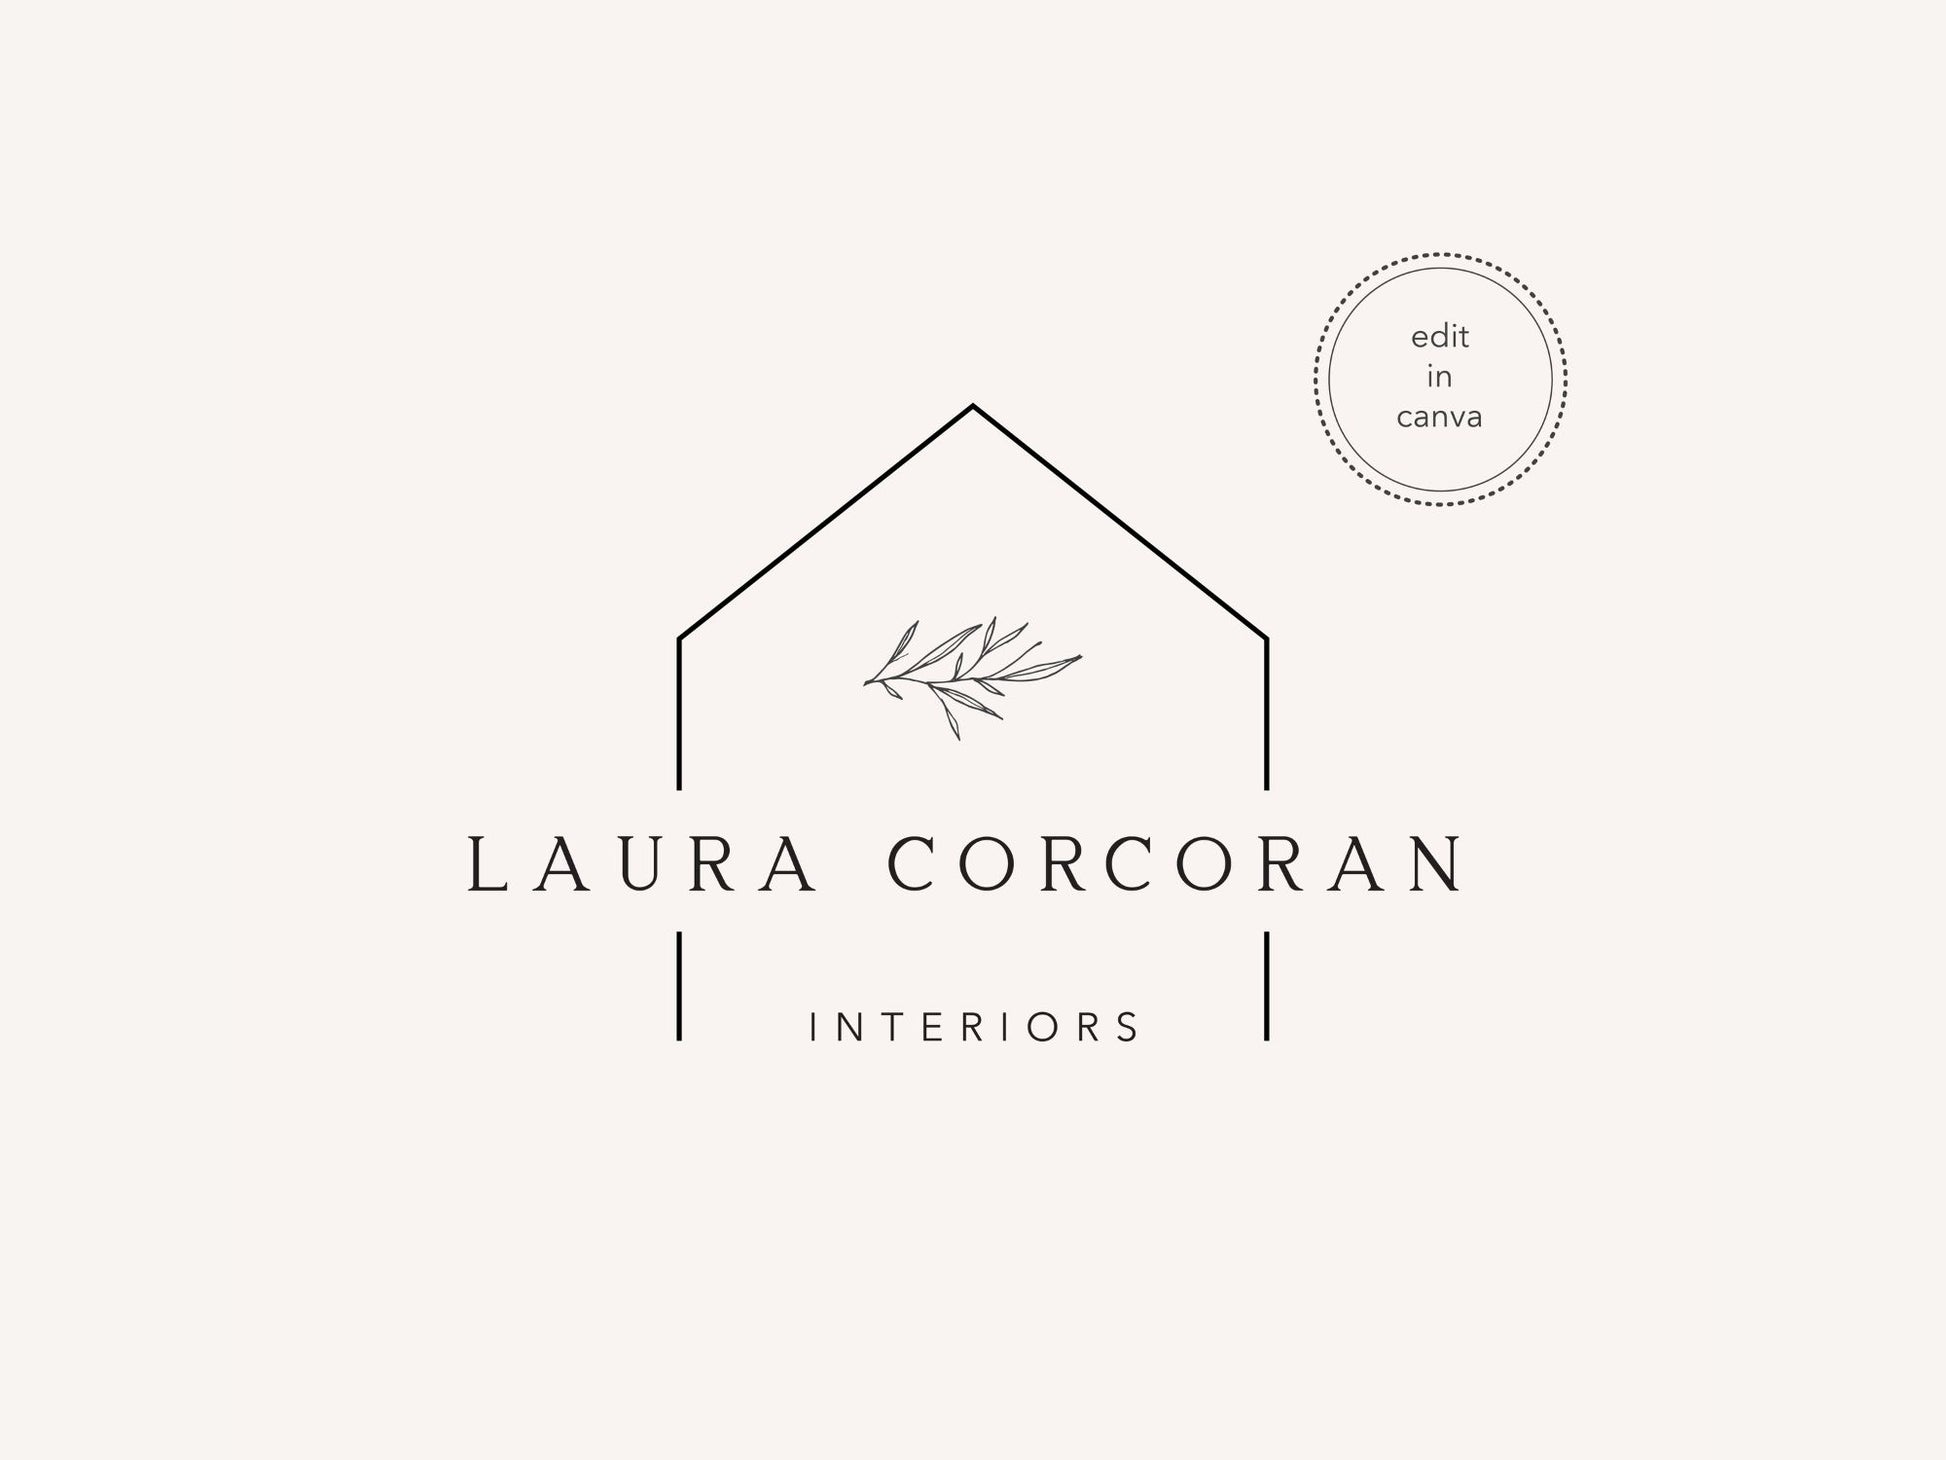 Real Estate Laura Corcoran Logo Template - Sleek and stylish logo design personalized for Laura Corcoran, offering a distinctive visual identity with sophistication and a contemporary touch.